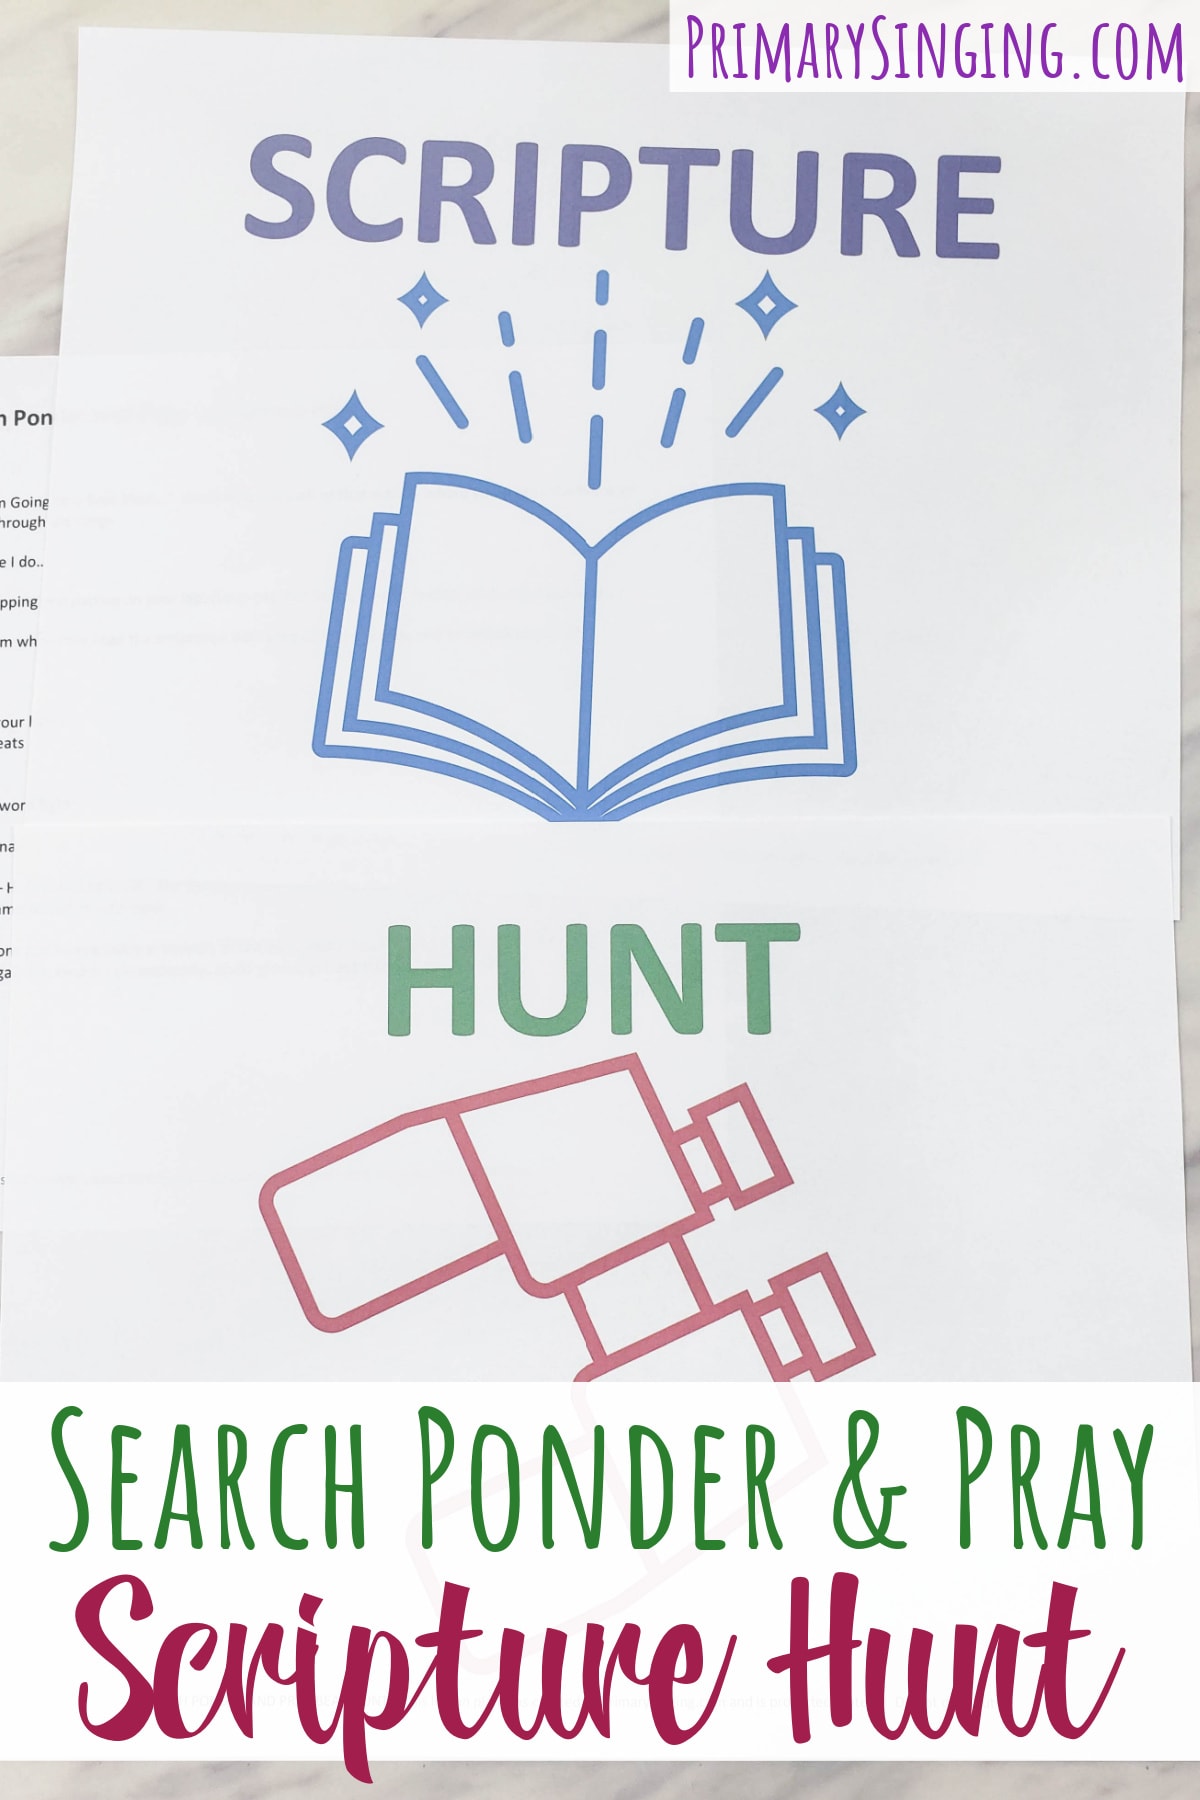 Search Ponder and Pray Scripture Hunt singing time ideas for LDS Primary music Leaders